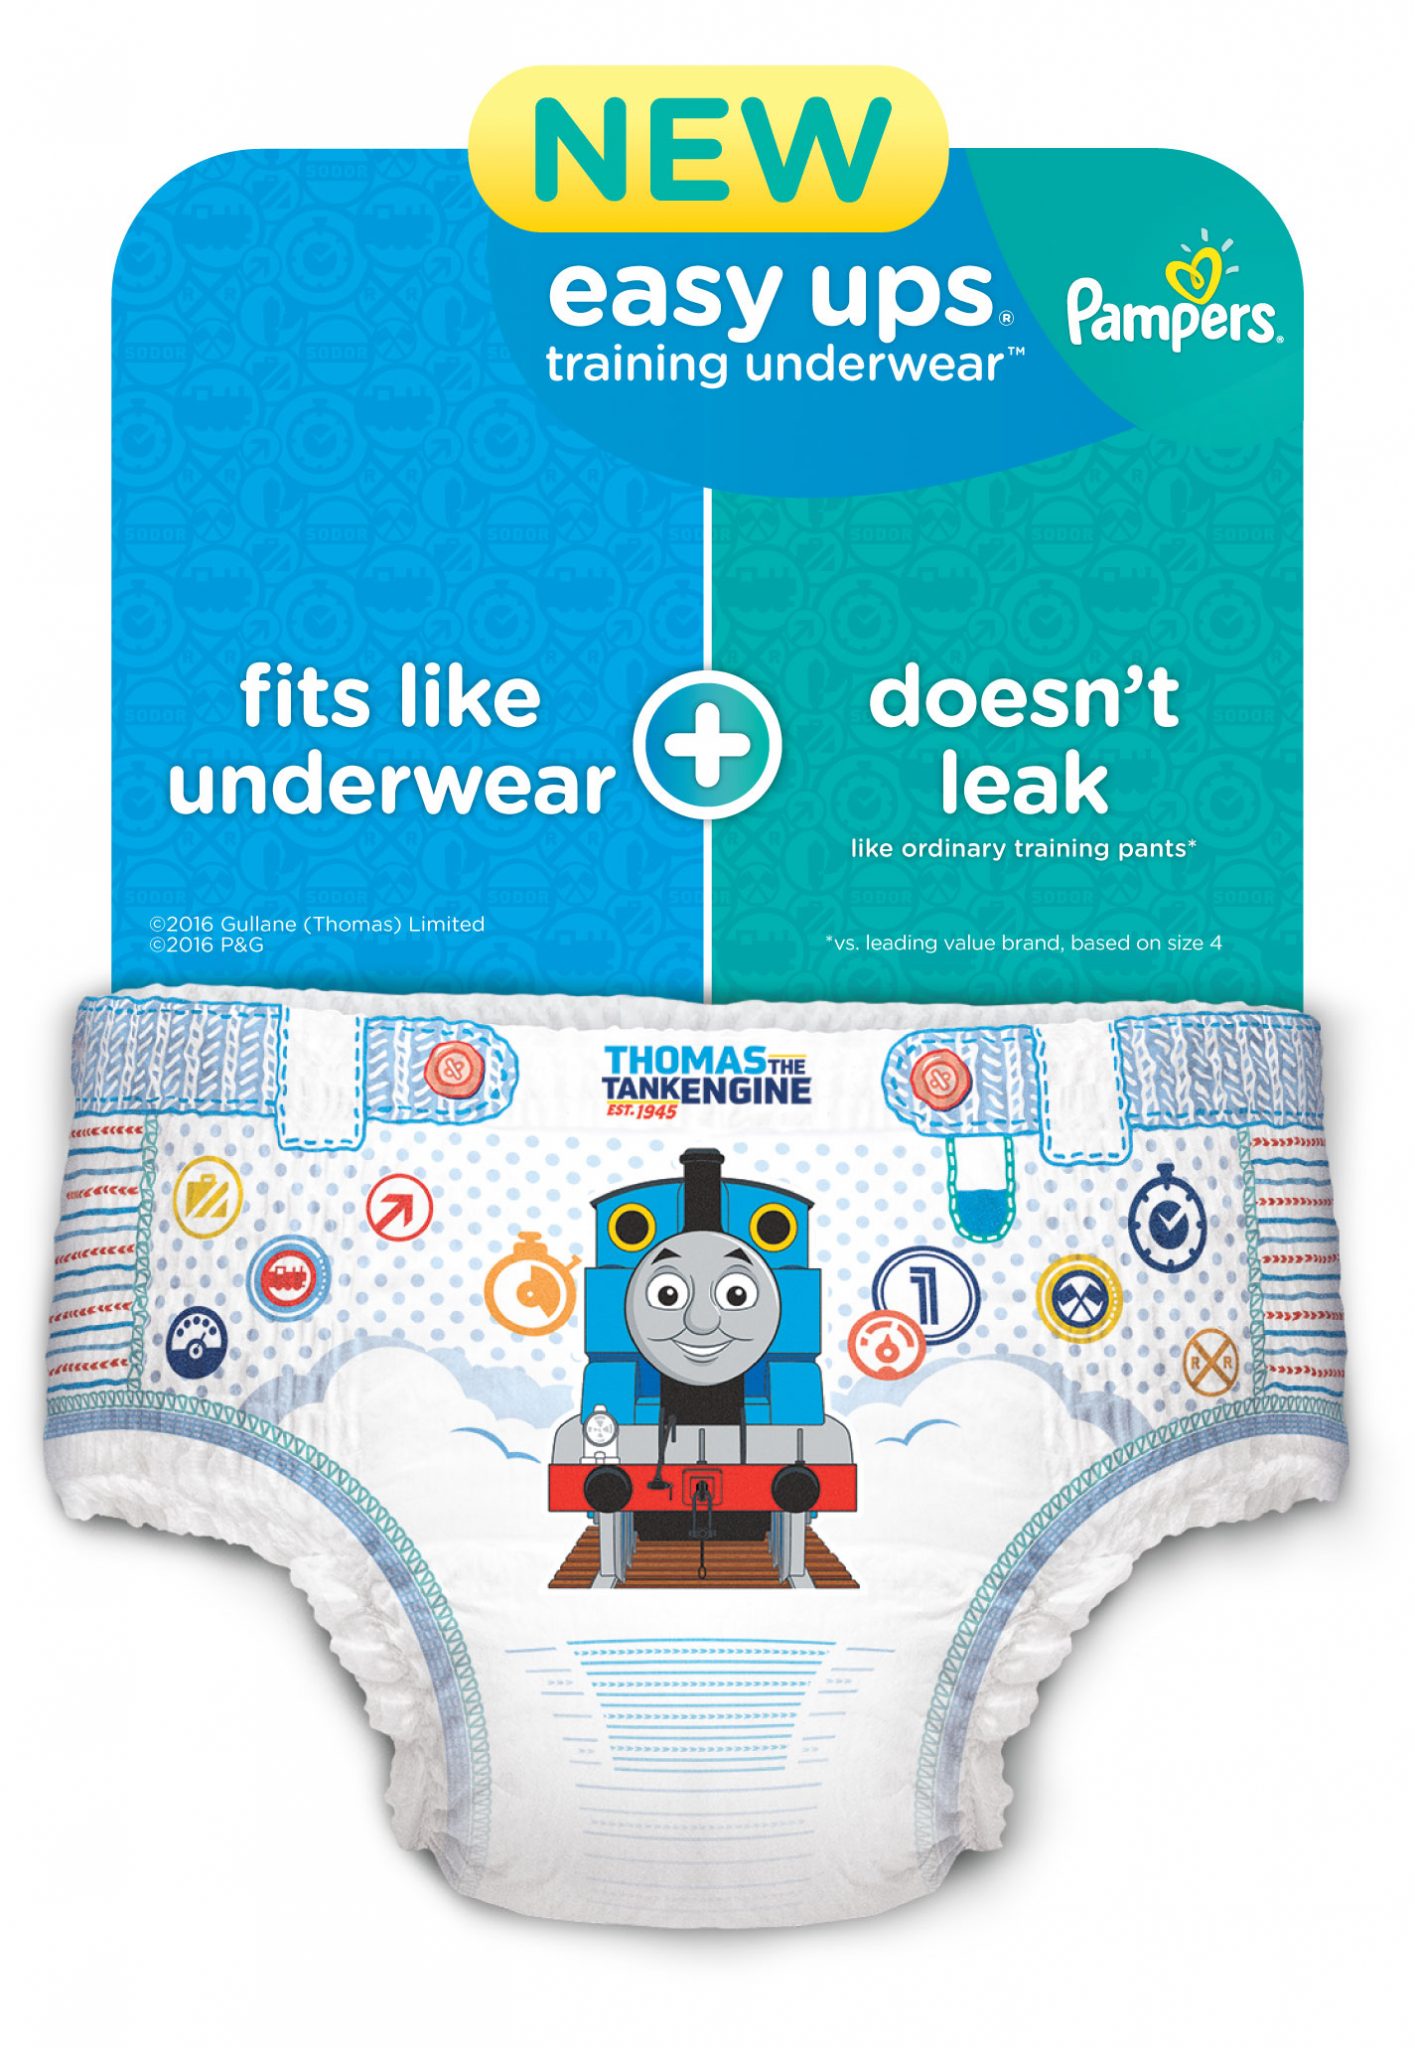 New And Improved Pampers Easy Ups Training Underwear